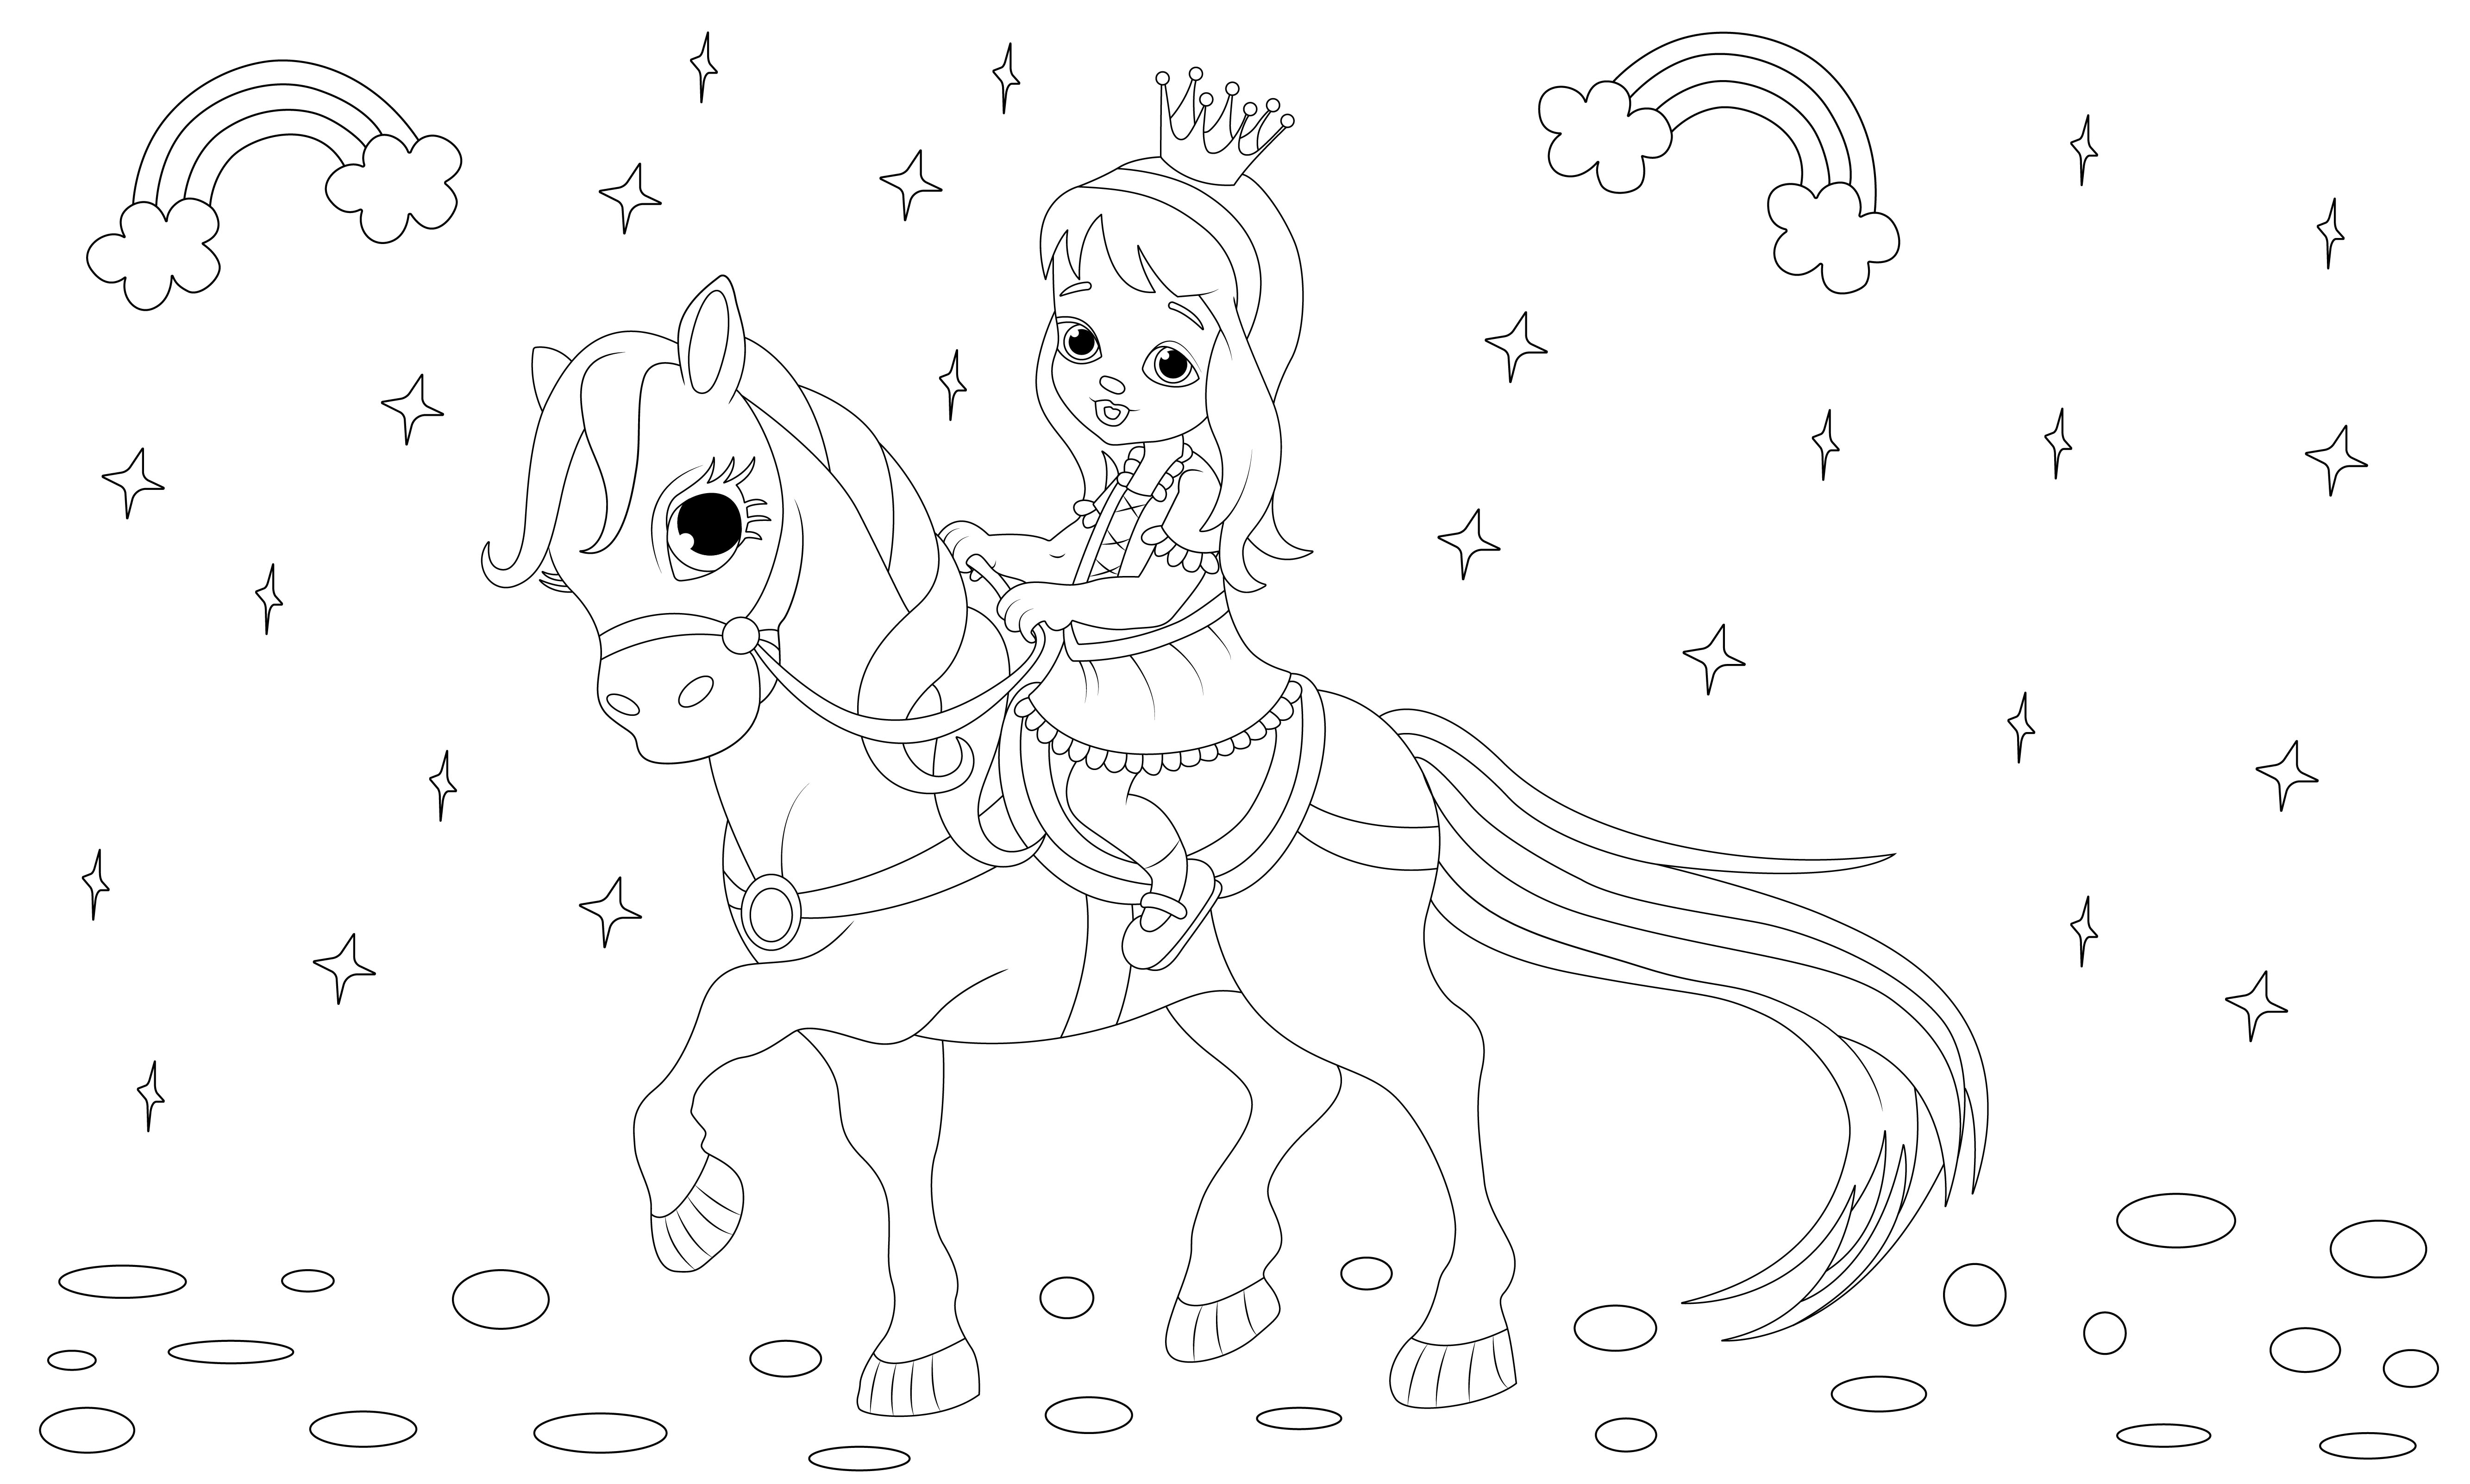 Draw coloring book page for kids by Gd_shahajalal